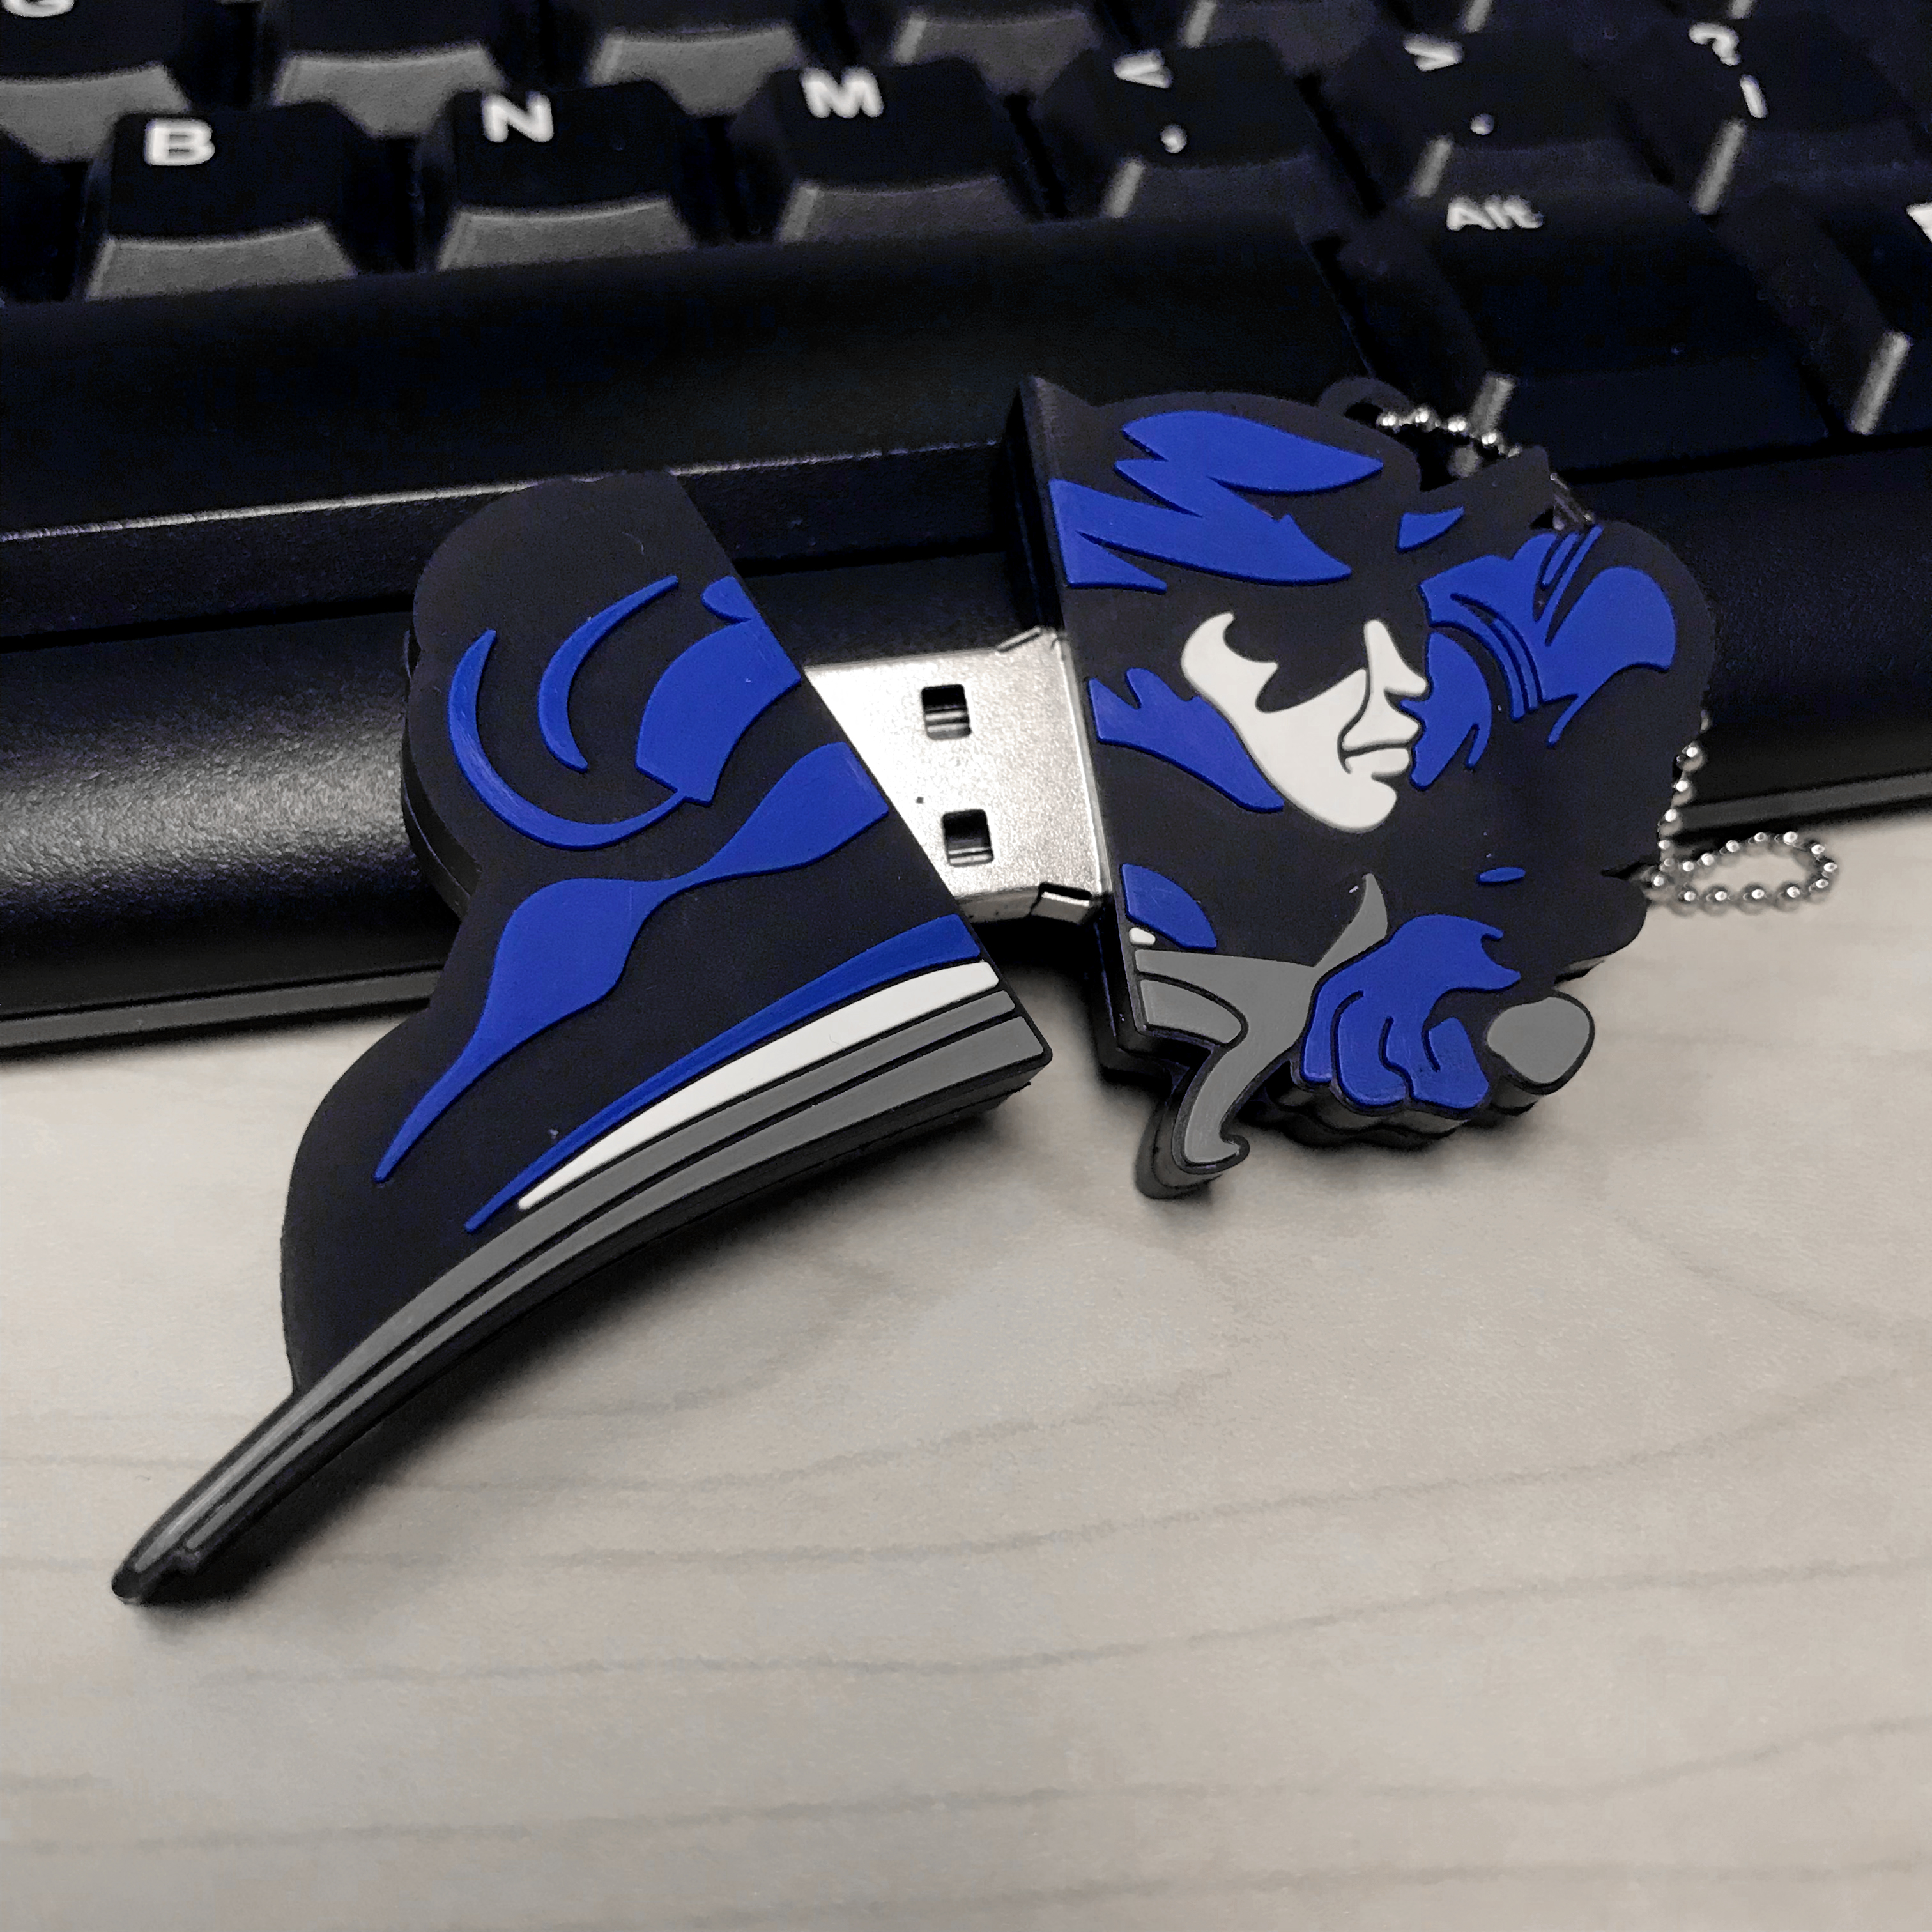 A flashdrive in the shape of the Lindsey Wilson college mascot.